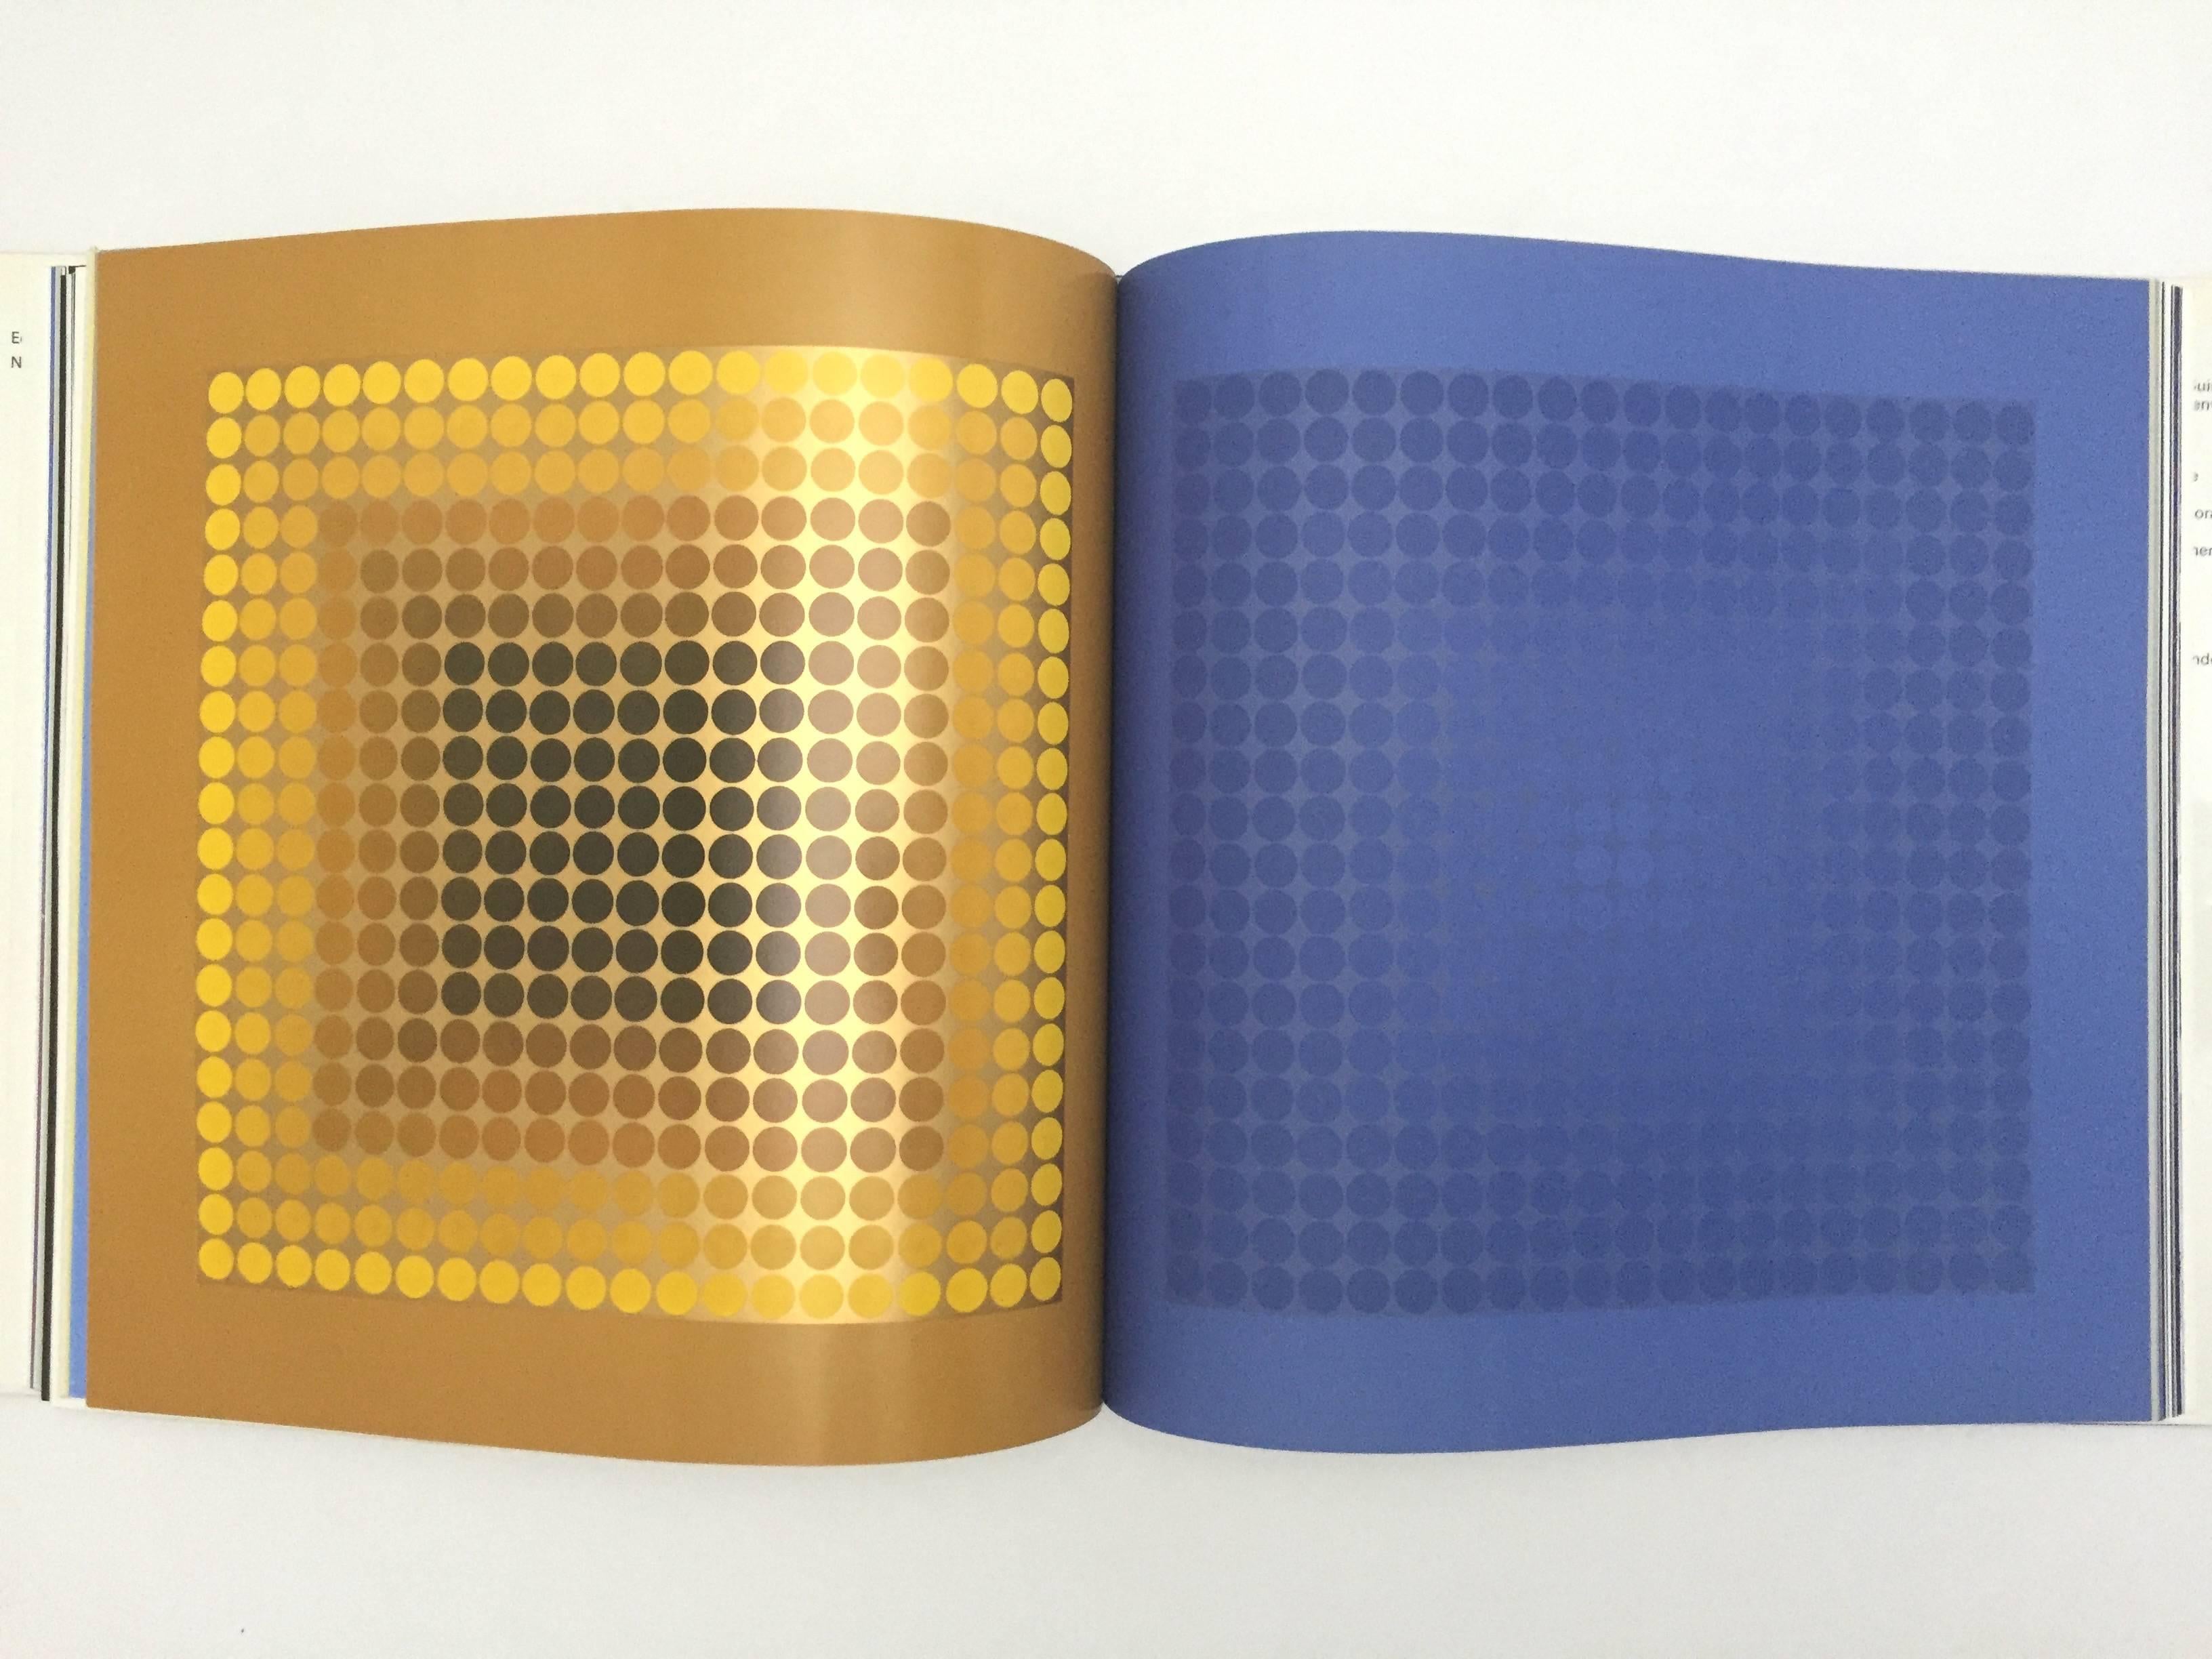 Vasarely Volumes I, II, III, IV Victor Vasarely, 1st Editions 1973-1979 For Sale 1